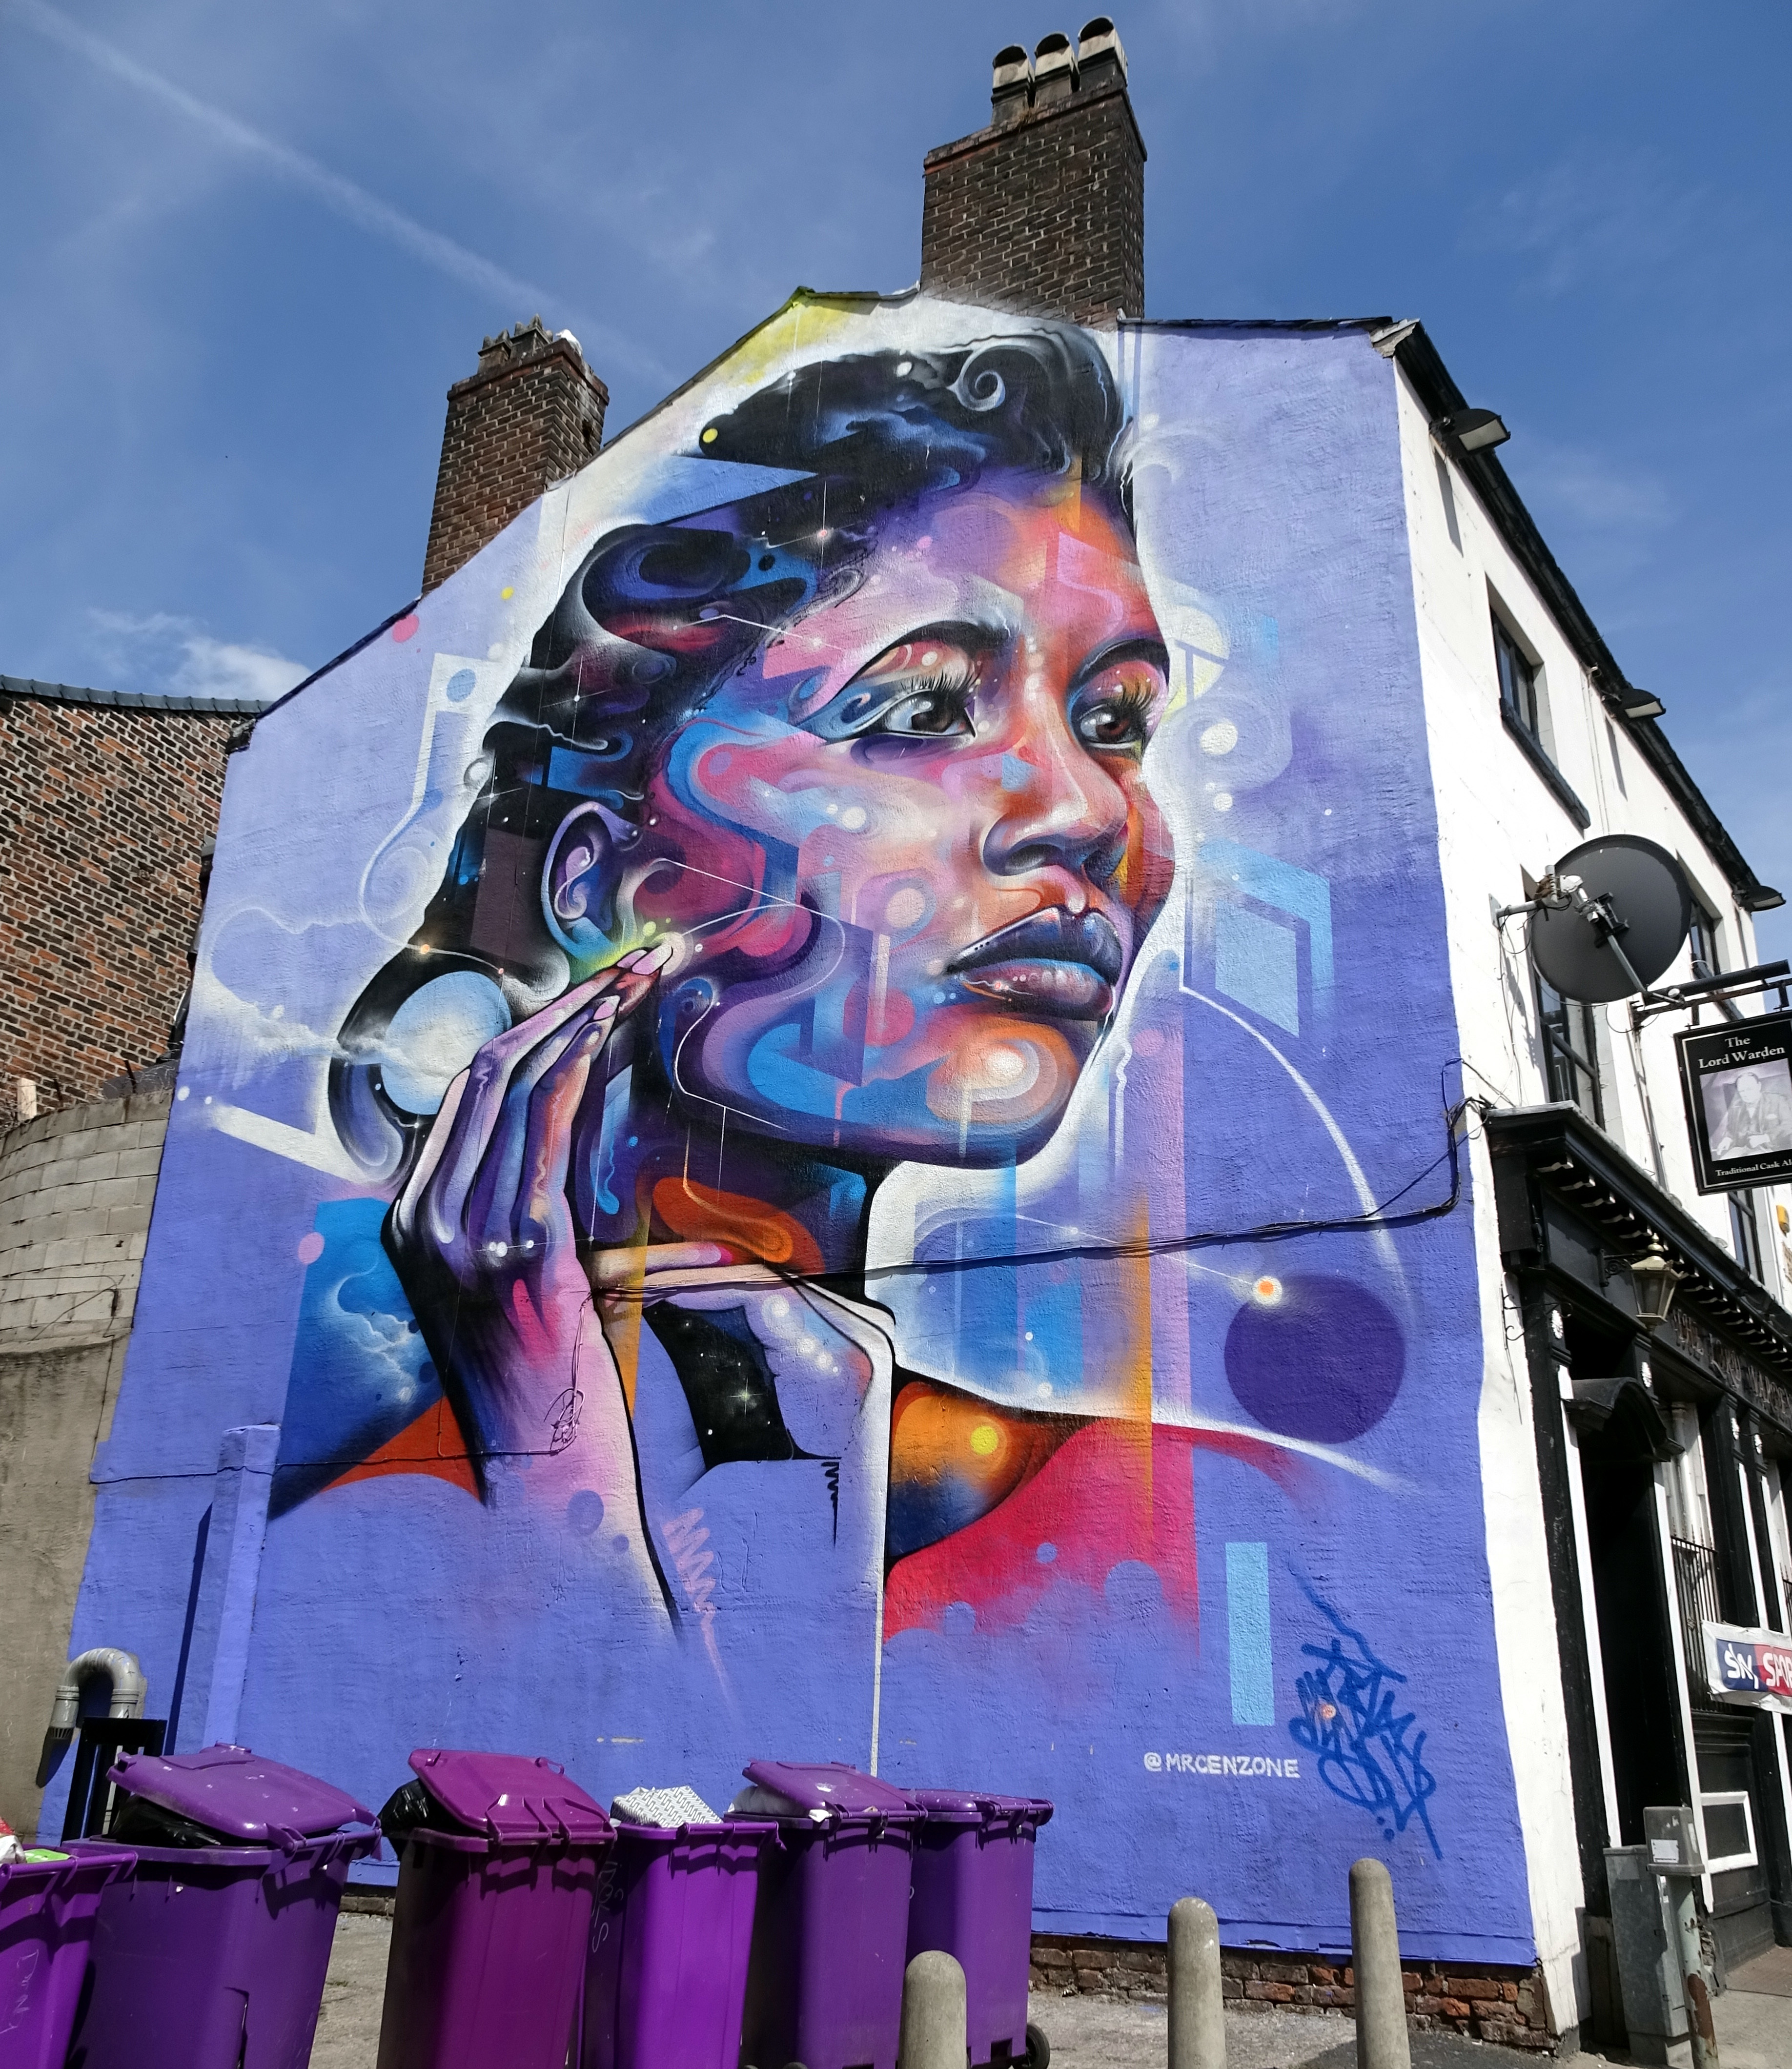 Graffiti 6556  by the artist Mr CENZ captured by Mephisroth in liverpool United Kingdom